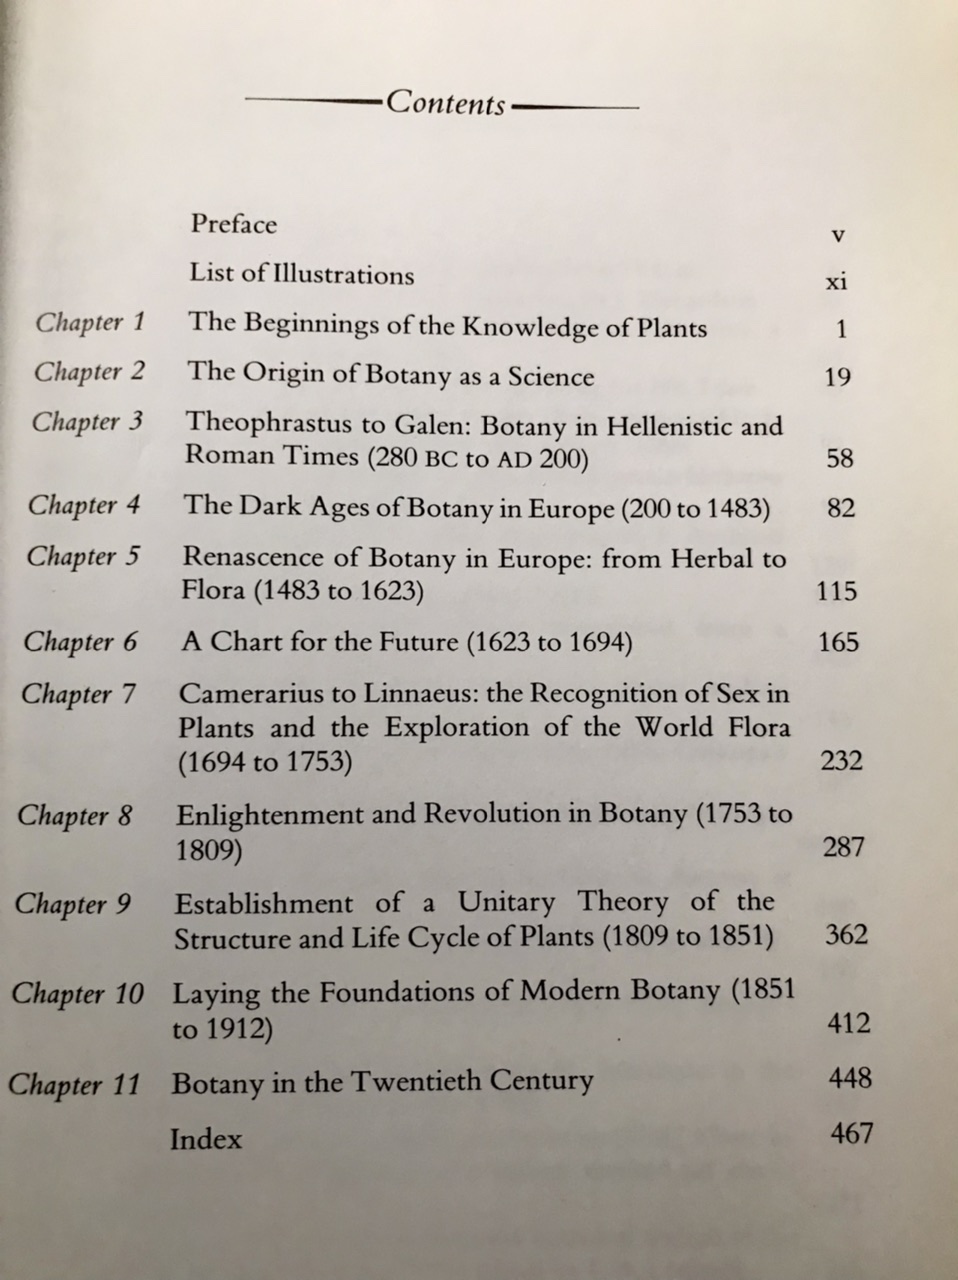 History of Botanical Science by A. G. Morton